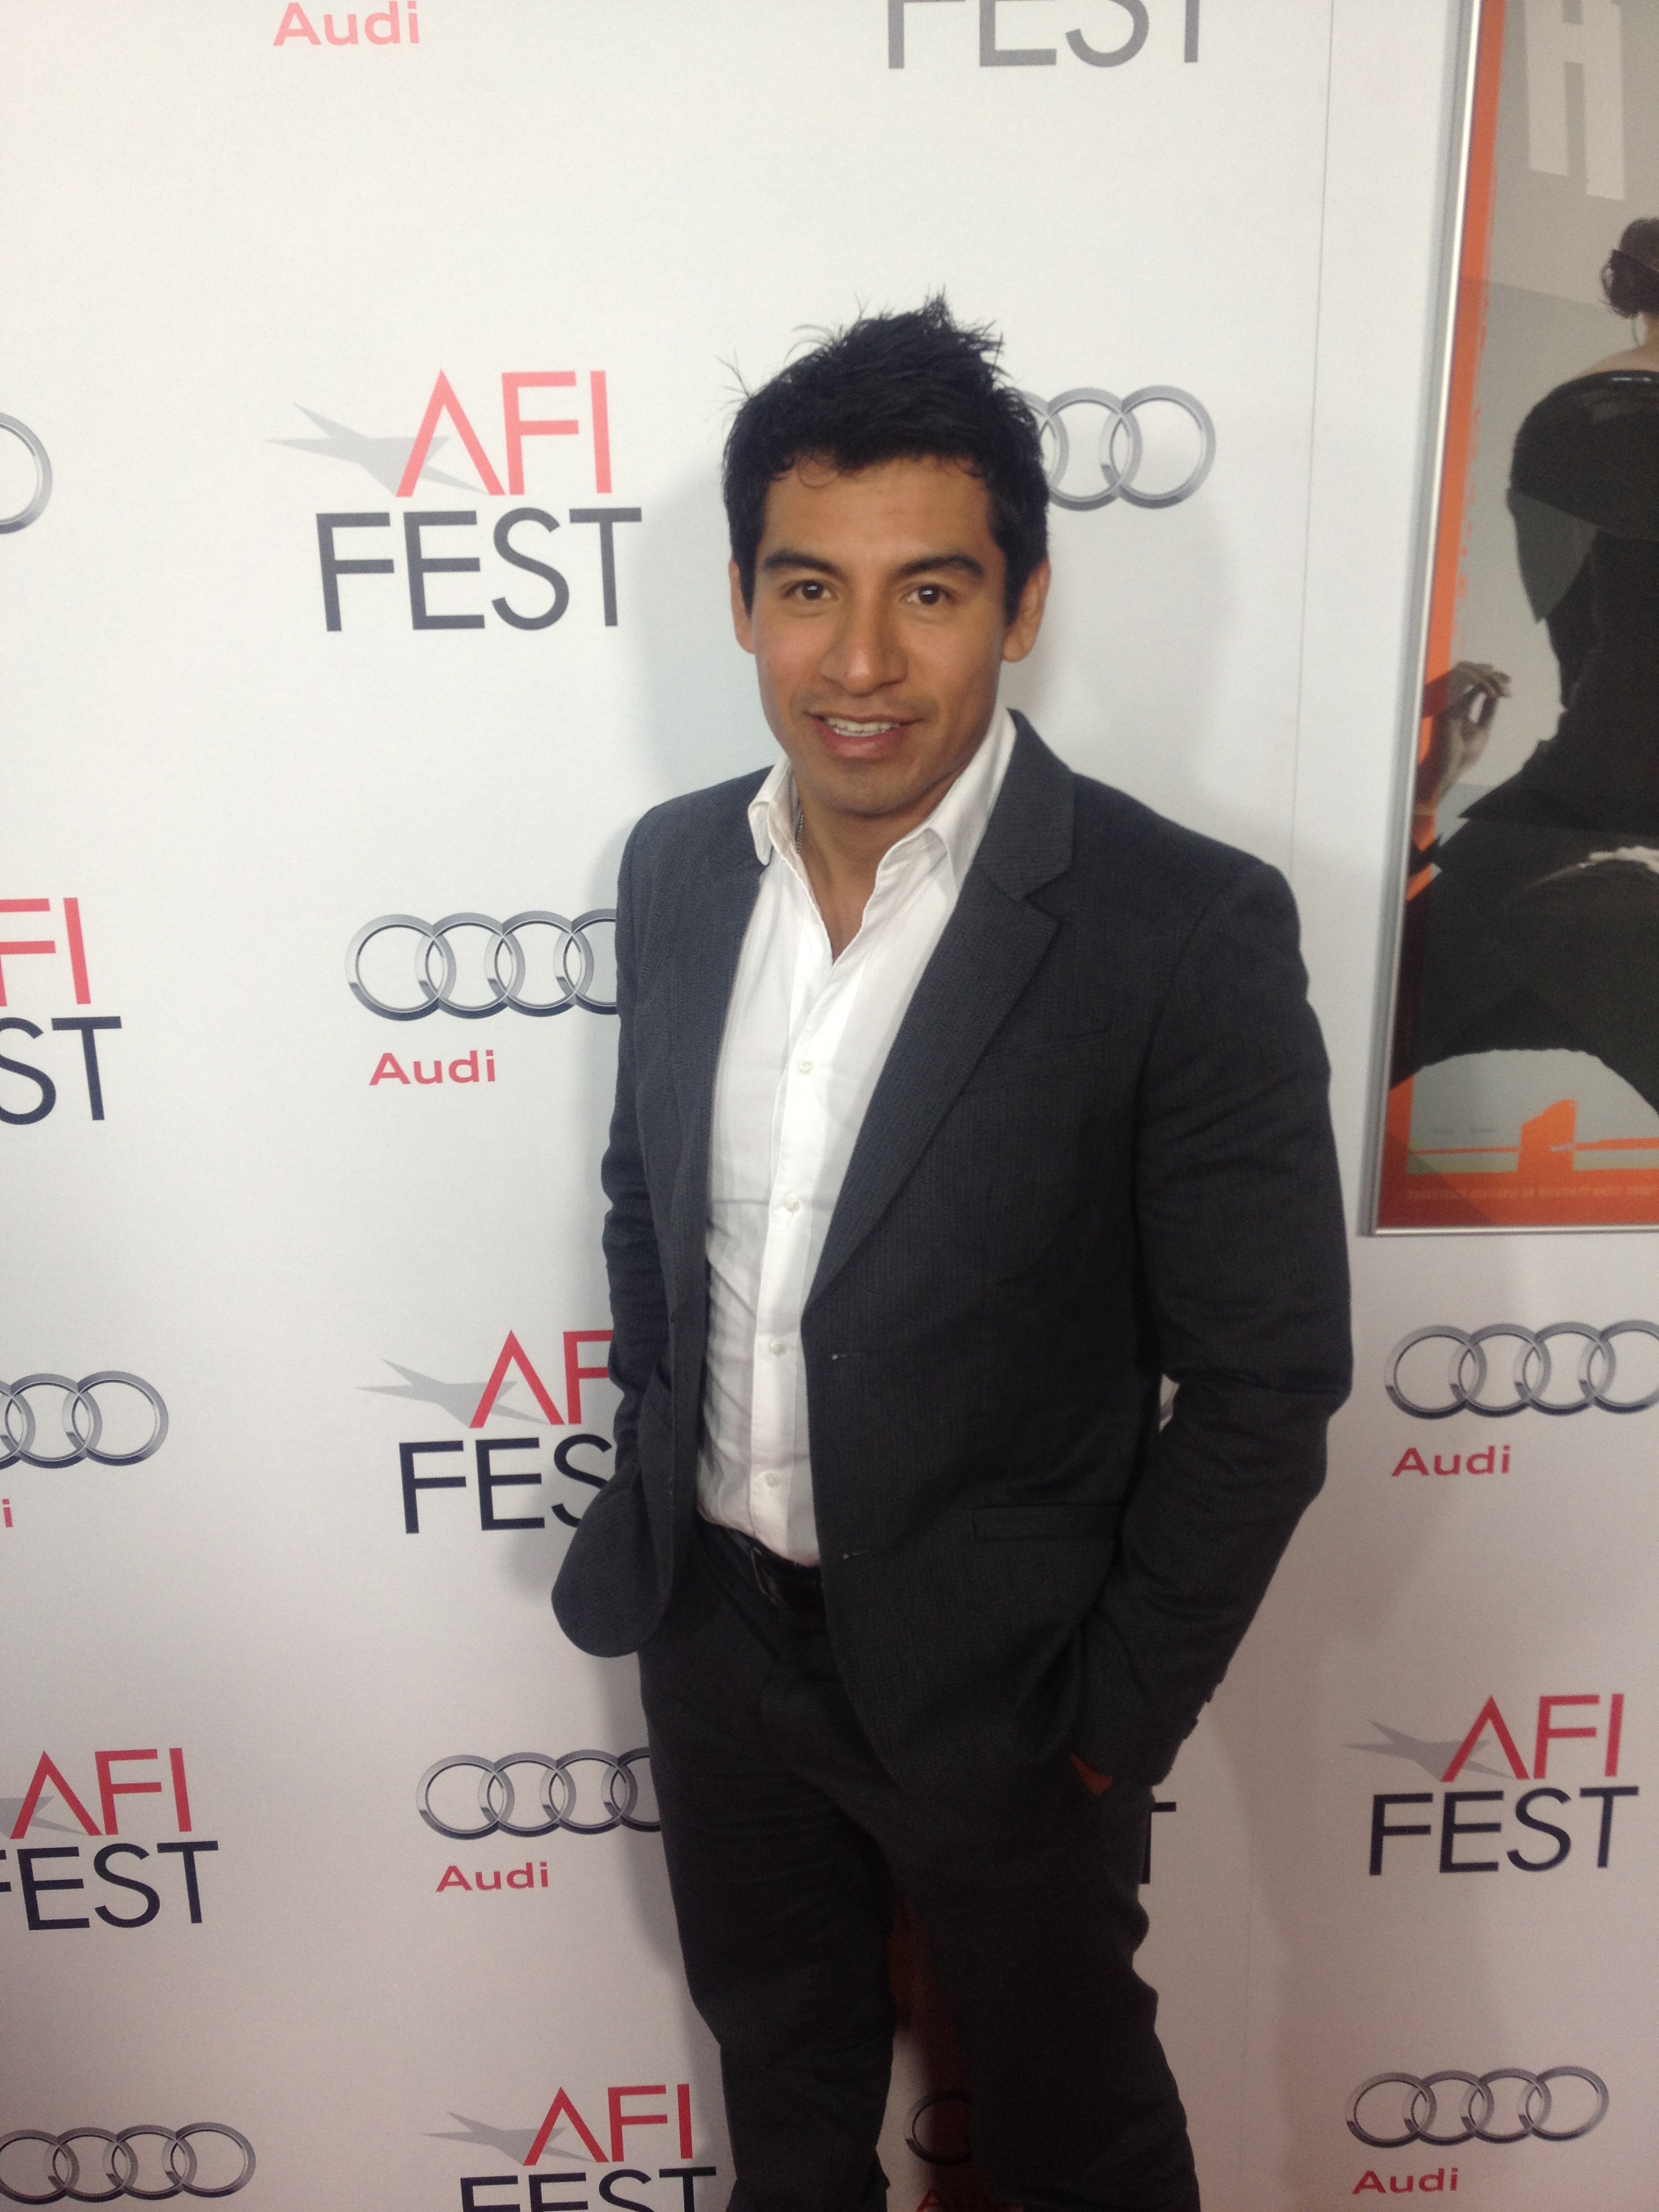 Actor Eloy Mendez attends the AFI Festival.